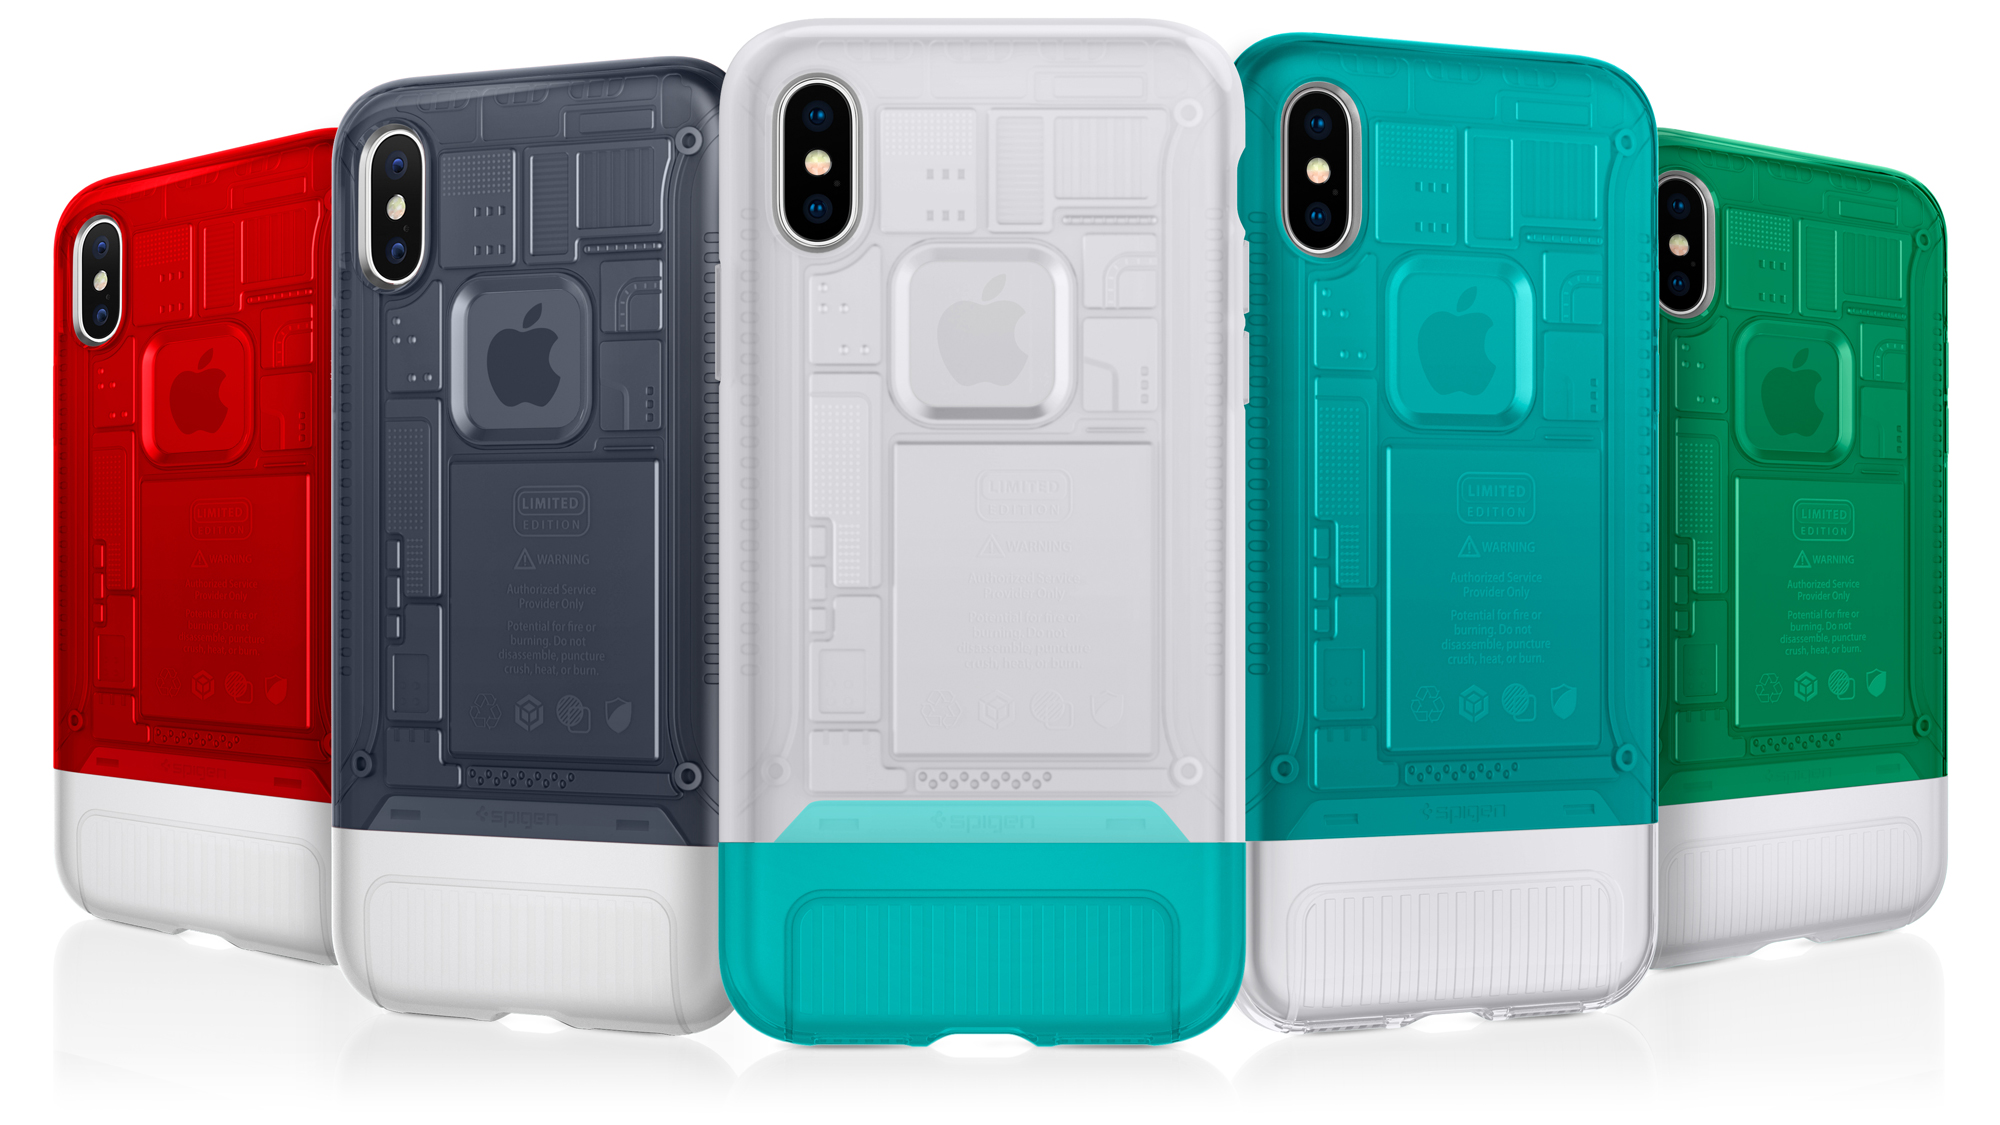 Give The Finger To Jony Ive With A Case That Makes Your iPhone X Look Like The Original